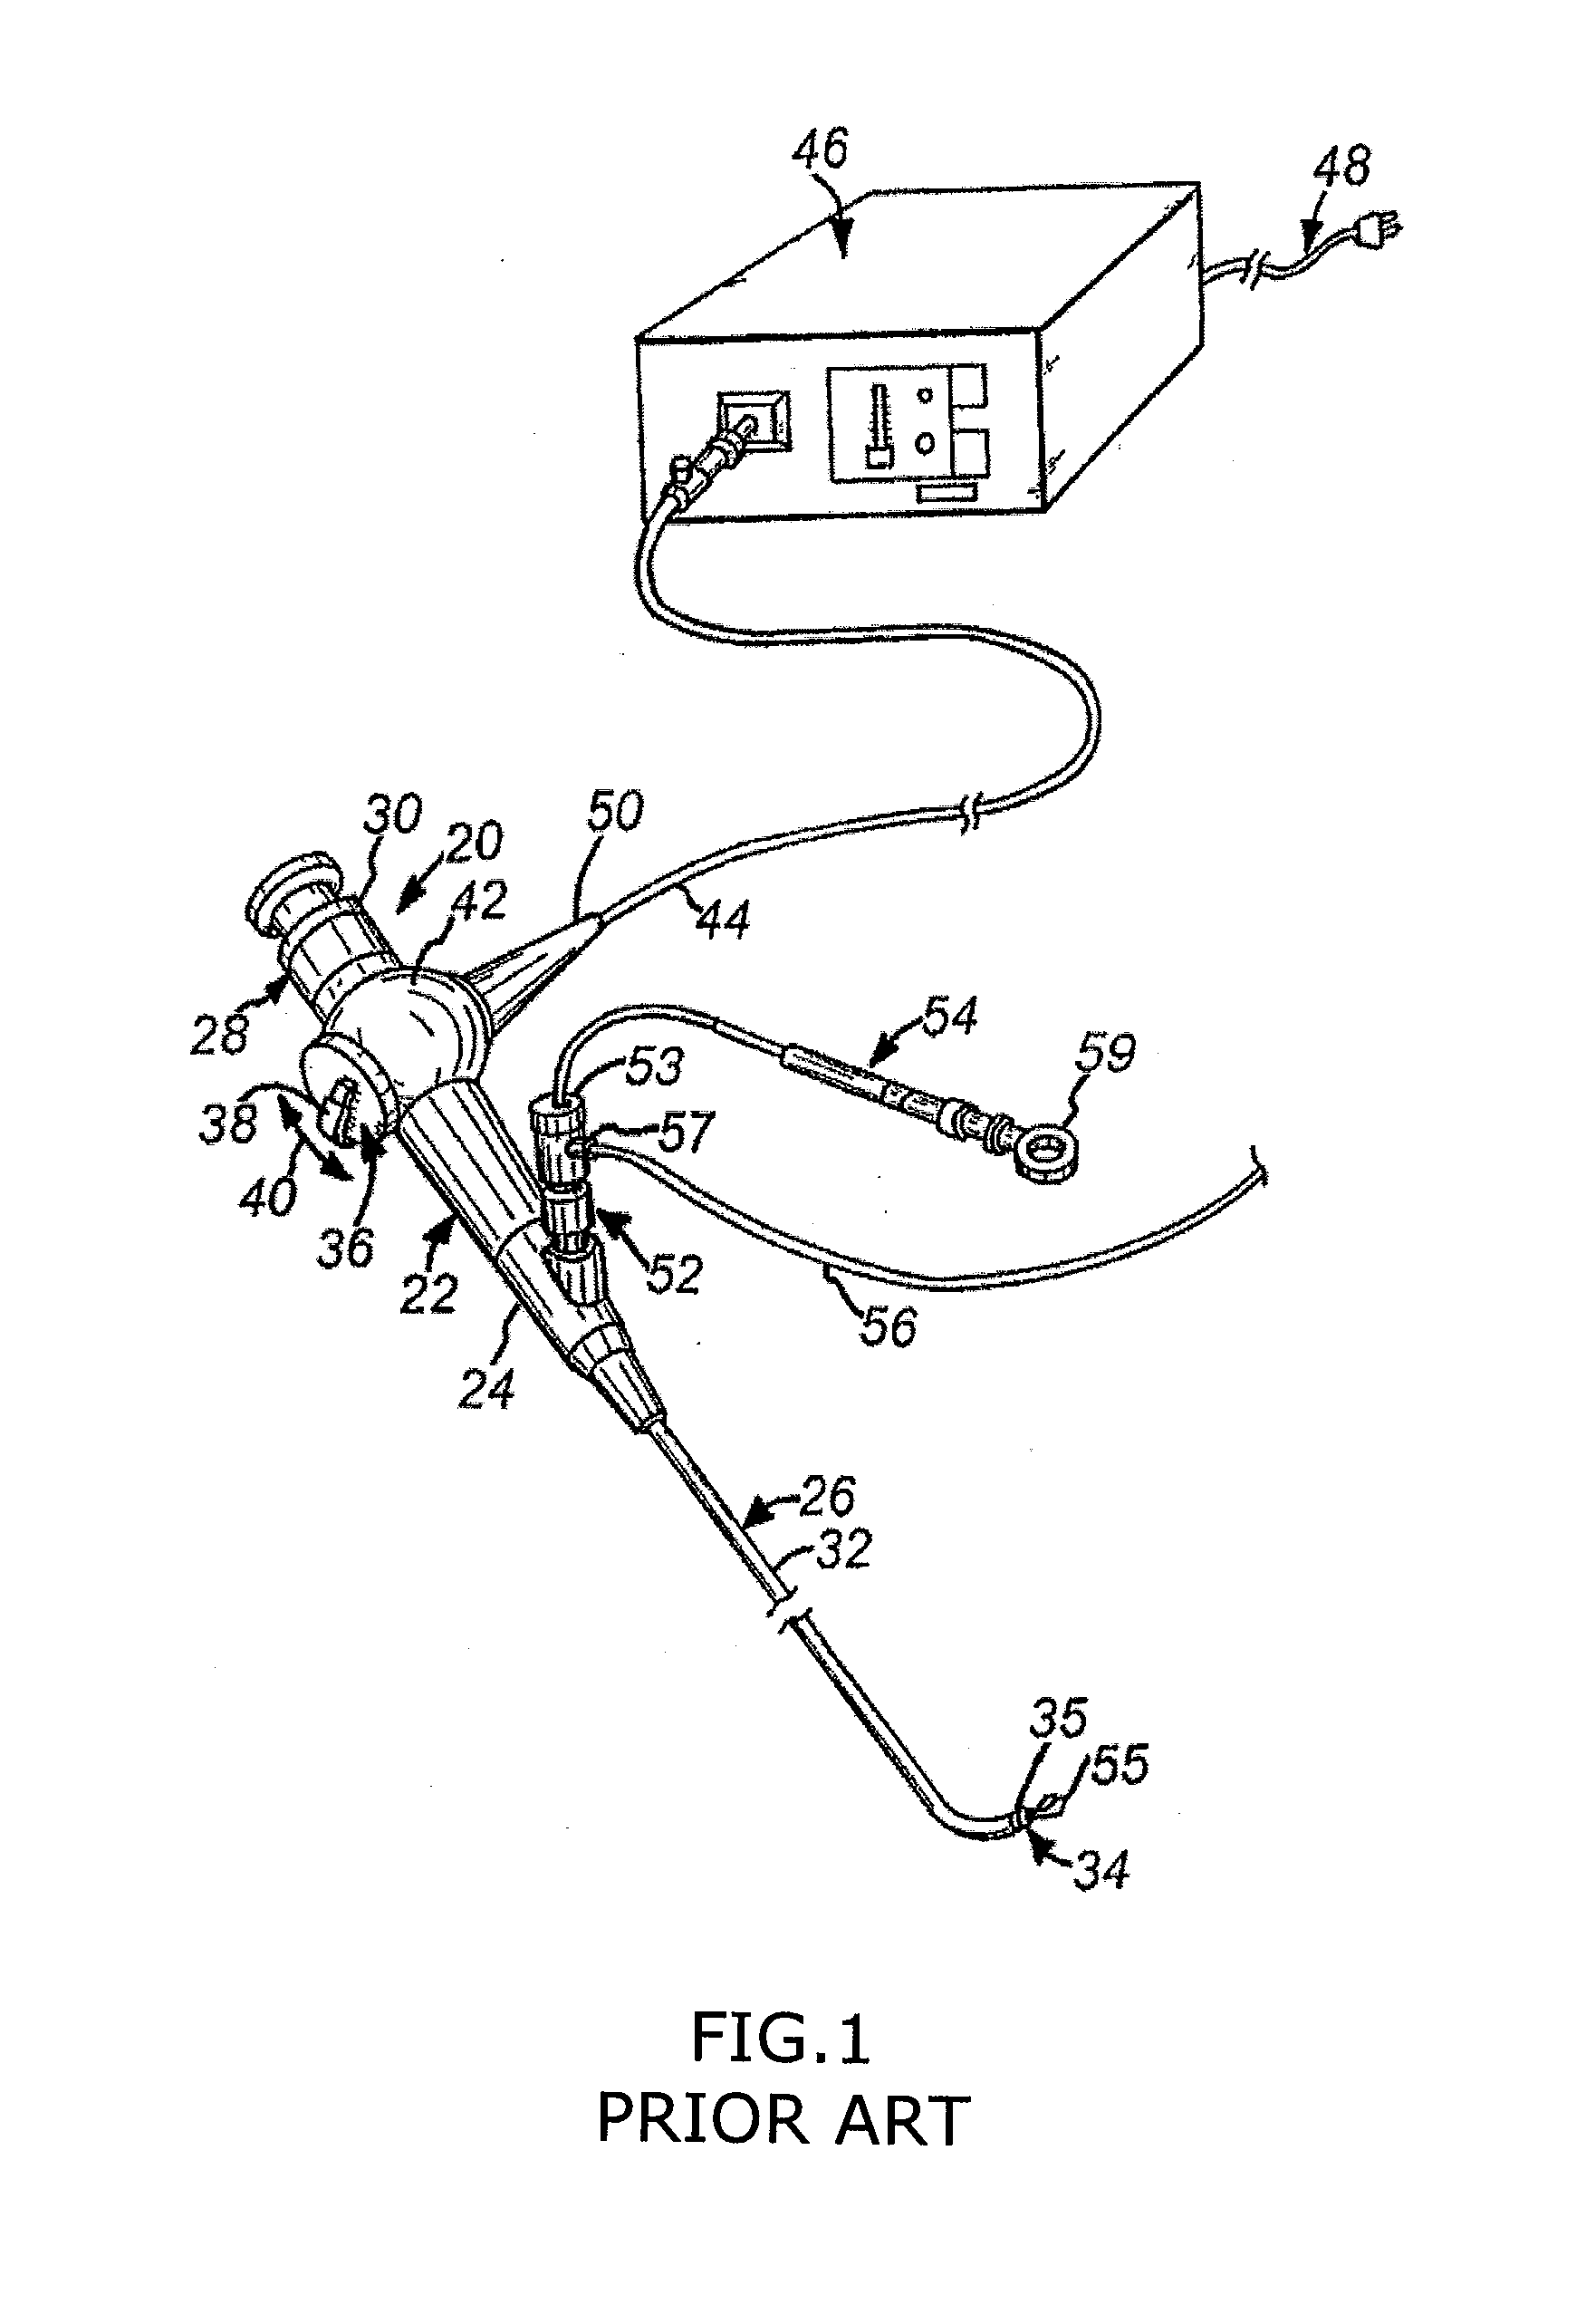 Endoscope with internal light source and power supply